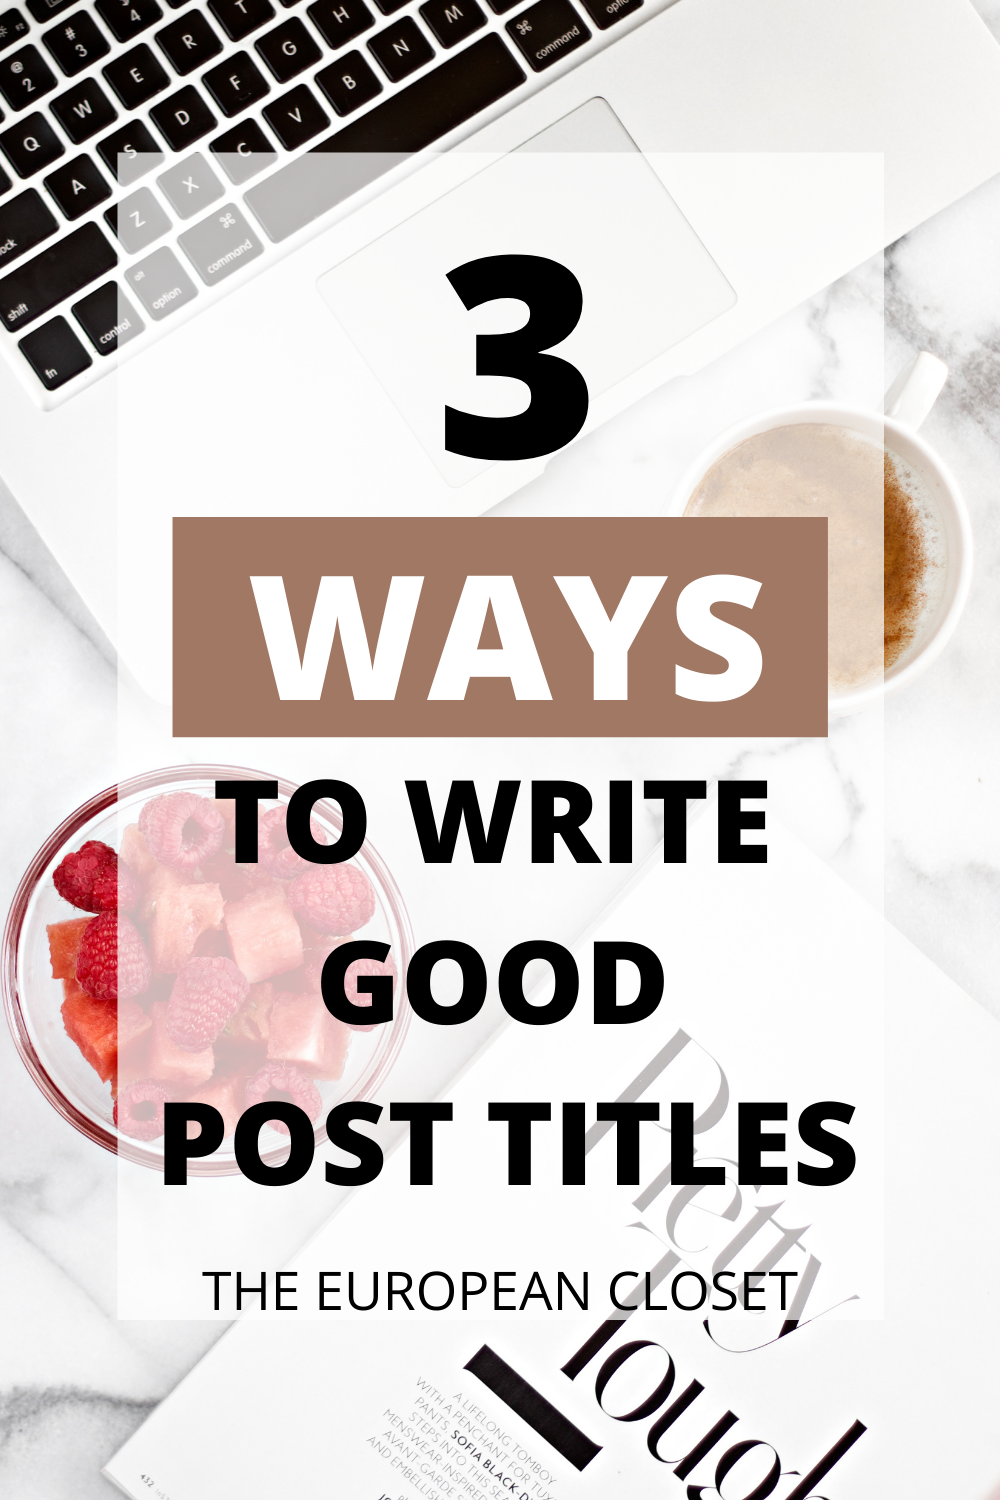 Creating a post is hard. But you know what's harder? To write a good blog post title. Today I'll show you how to write a good title in 3 steps